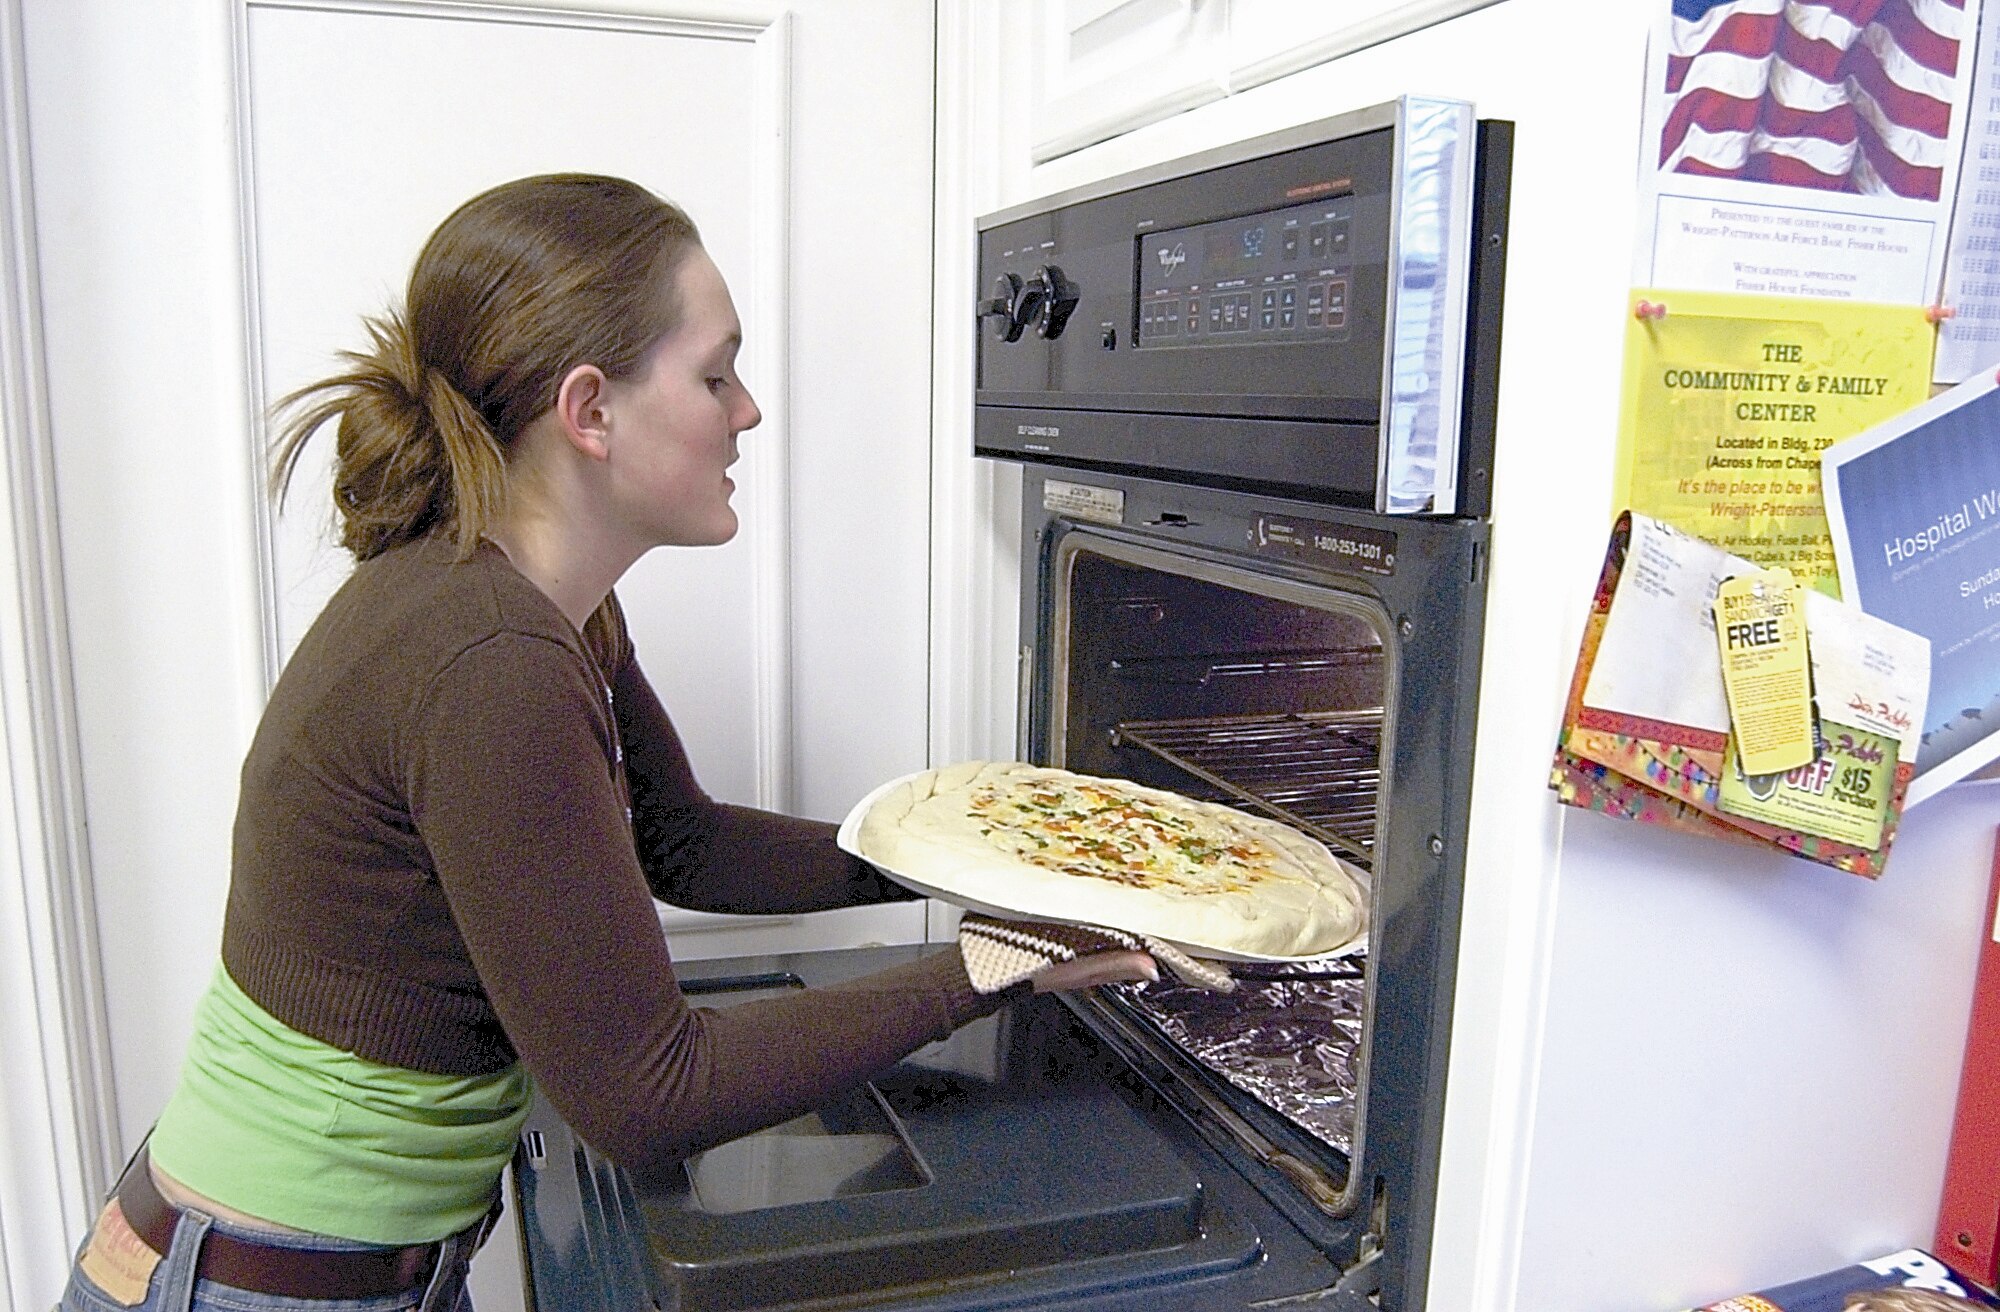 WRIGHT-PATTERSON AIR FORCE BASE, Ohio - Jenna Bullock prepares to heat up a pizza for guests at the Fisher House. A Beavercreek High School junior, Jenna and her mother, Paula, cook meals and host bingo games twice a month at the house to distract patients and their families for a time from their problems. (Air Force photo by Spencer P. Lane)

